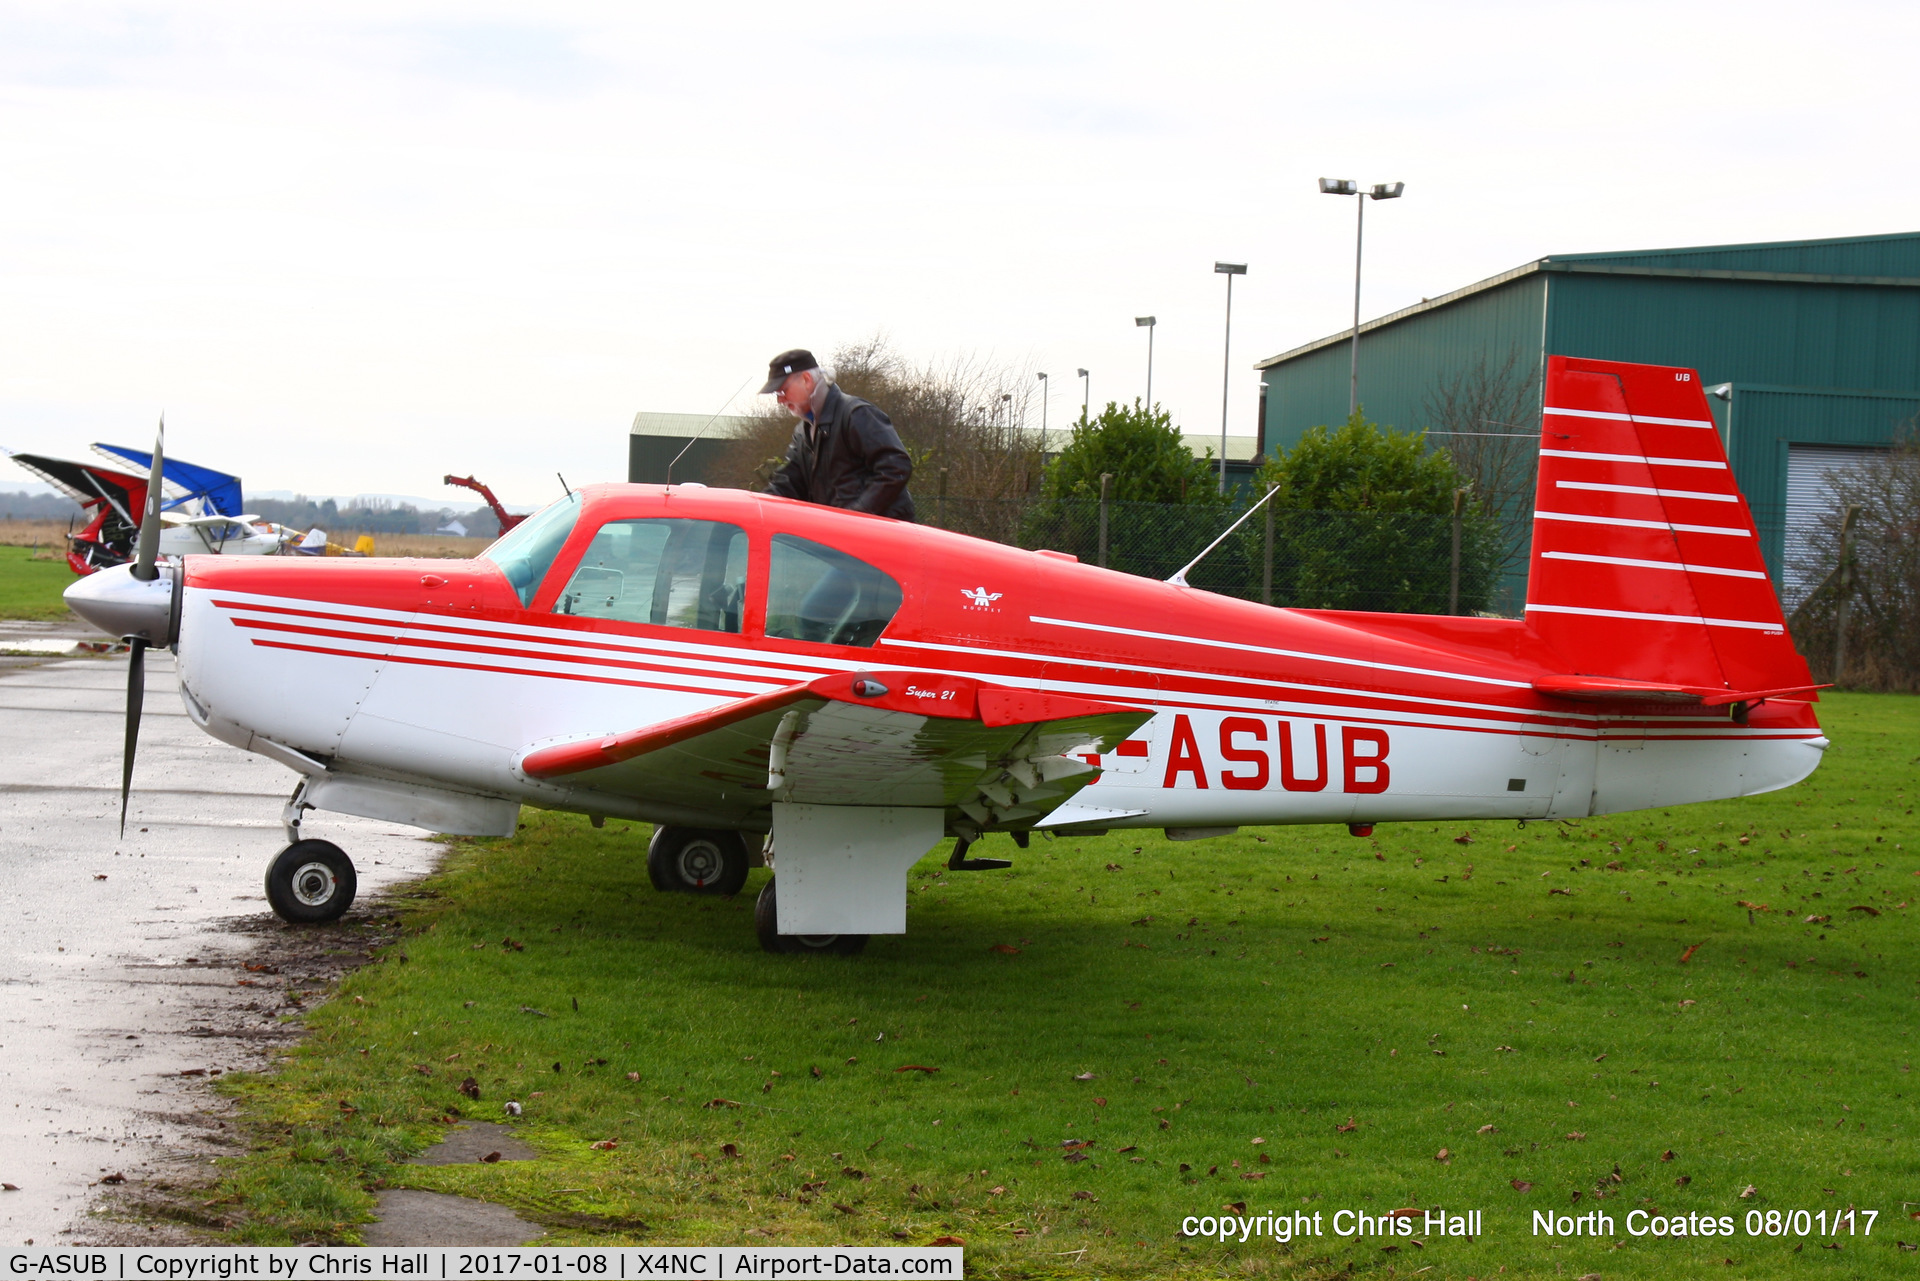 G-ASUB, 1964 Mooney M20E Super 21 C/N 397, at the Brass Monkey fly in, North Coates